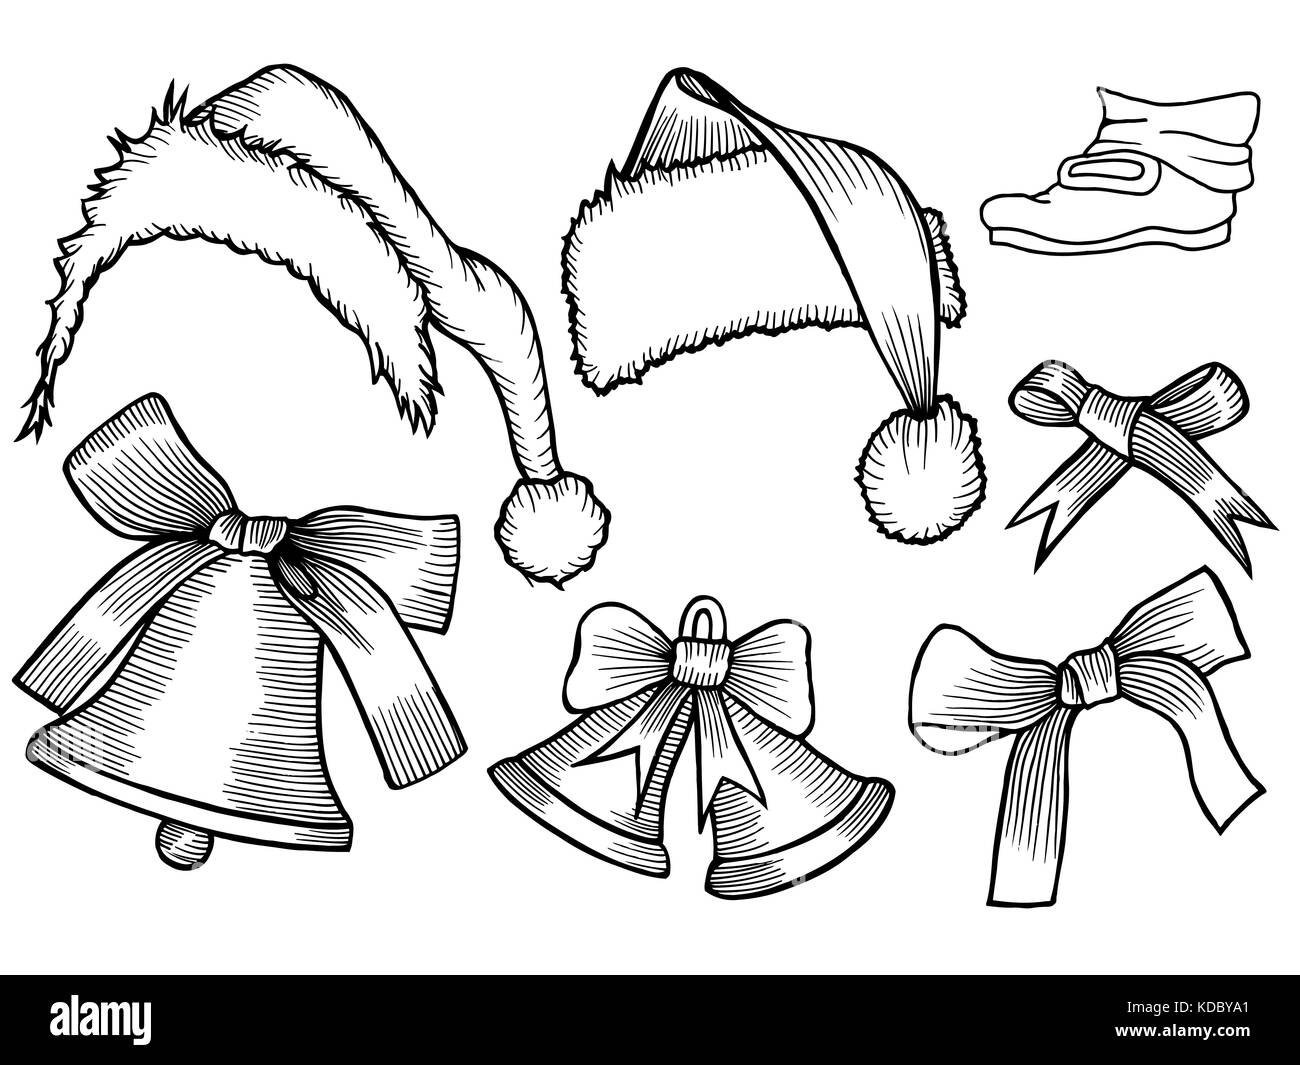 Set of monochrome doodle hats Santa Claus. Template Christmas hat for design, decorating cards and collages. Stock Vector